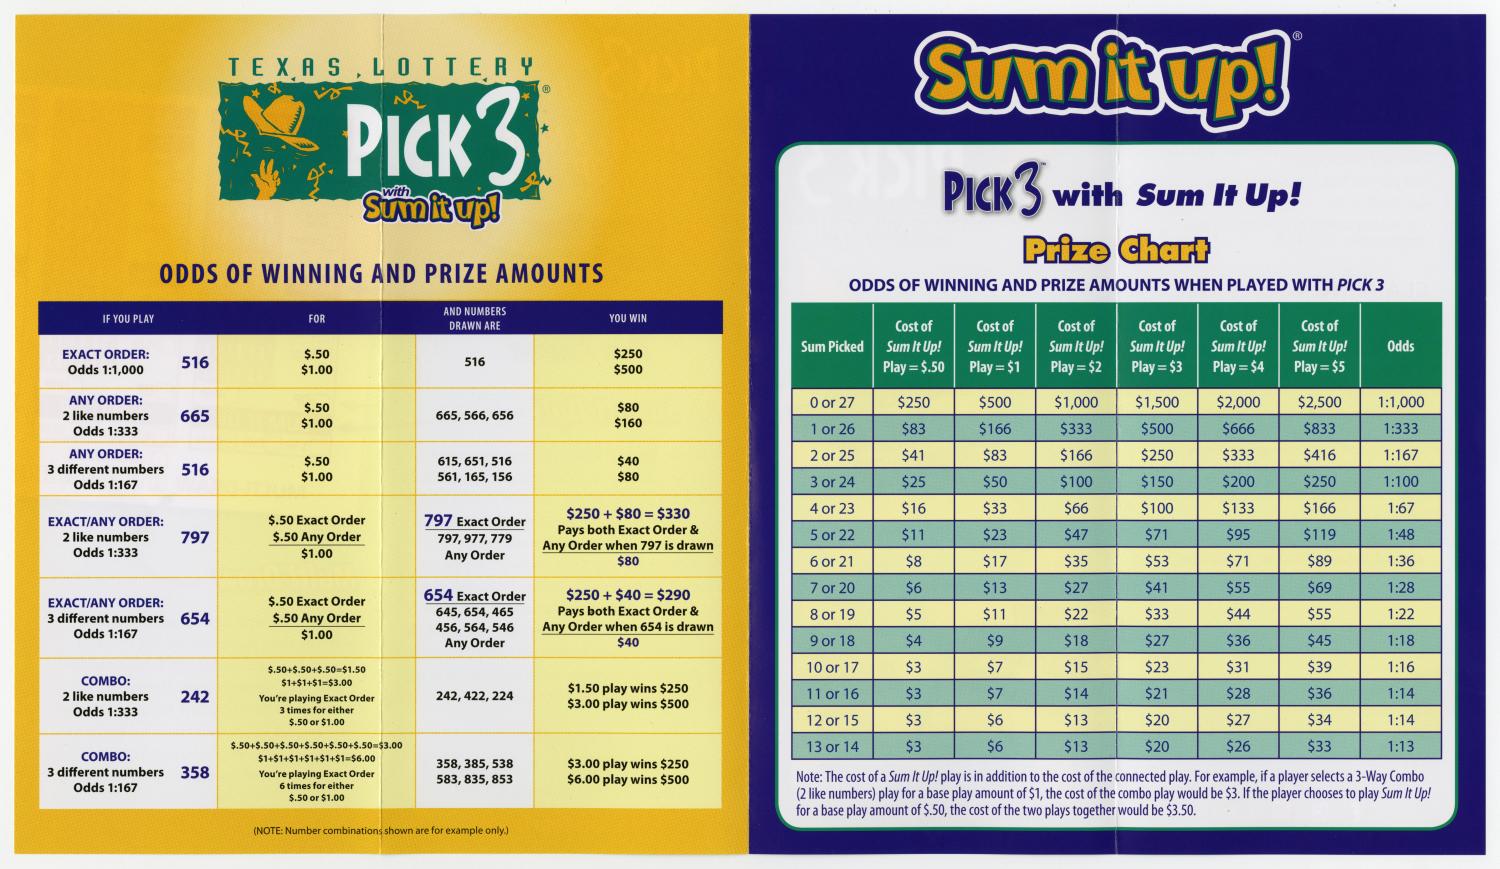 How to Play Texas Lottery Pick 3 with Sum It Up! Page 3 of 4 The